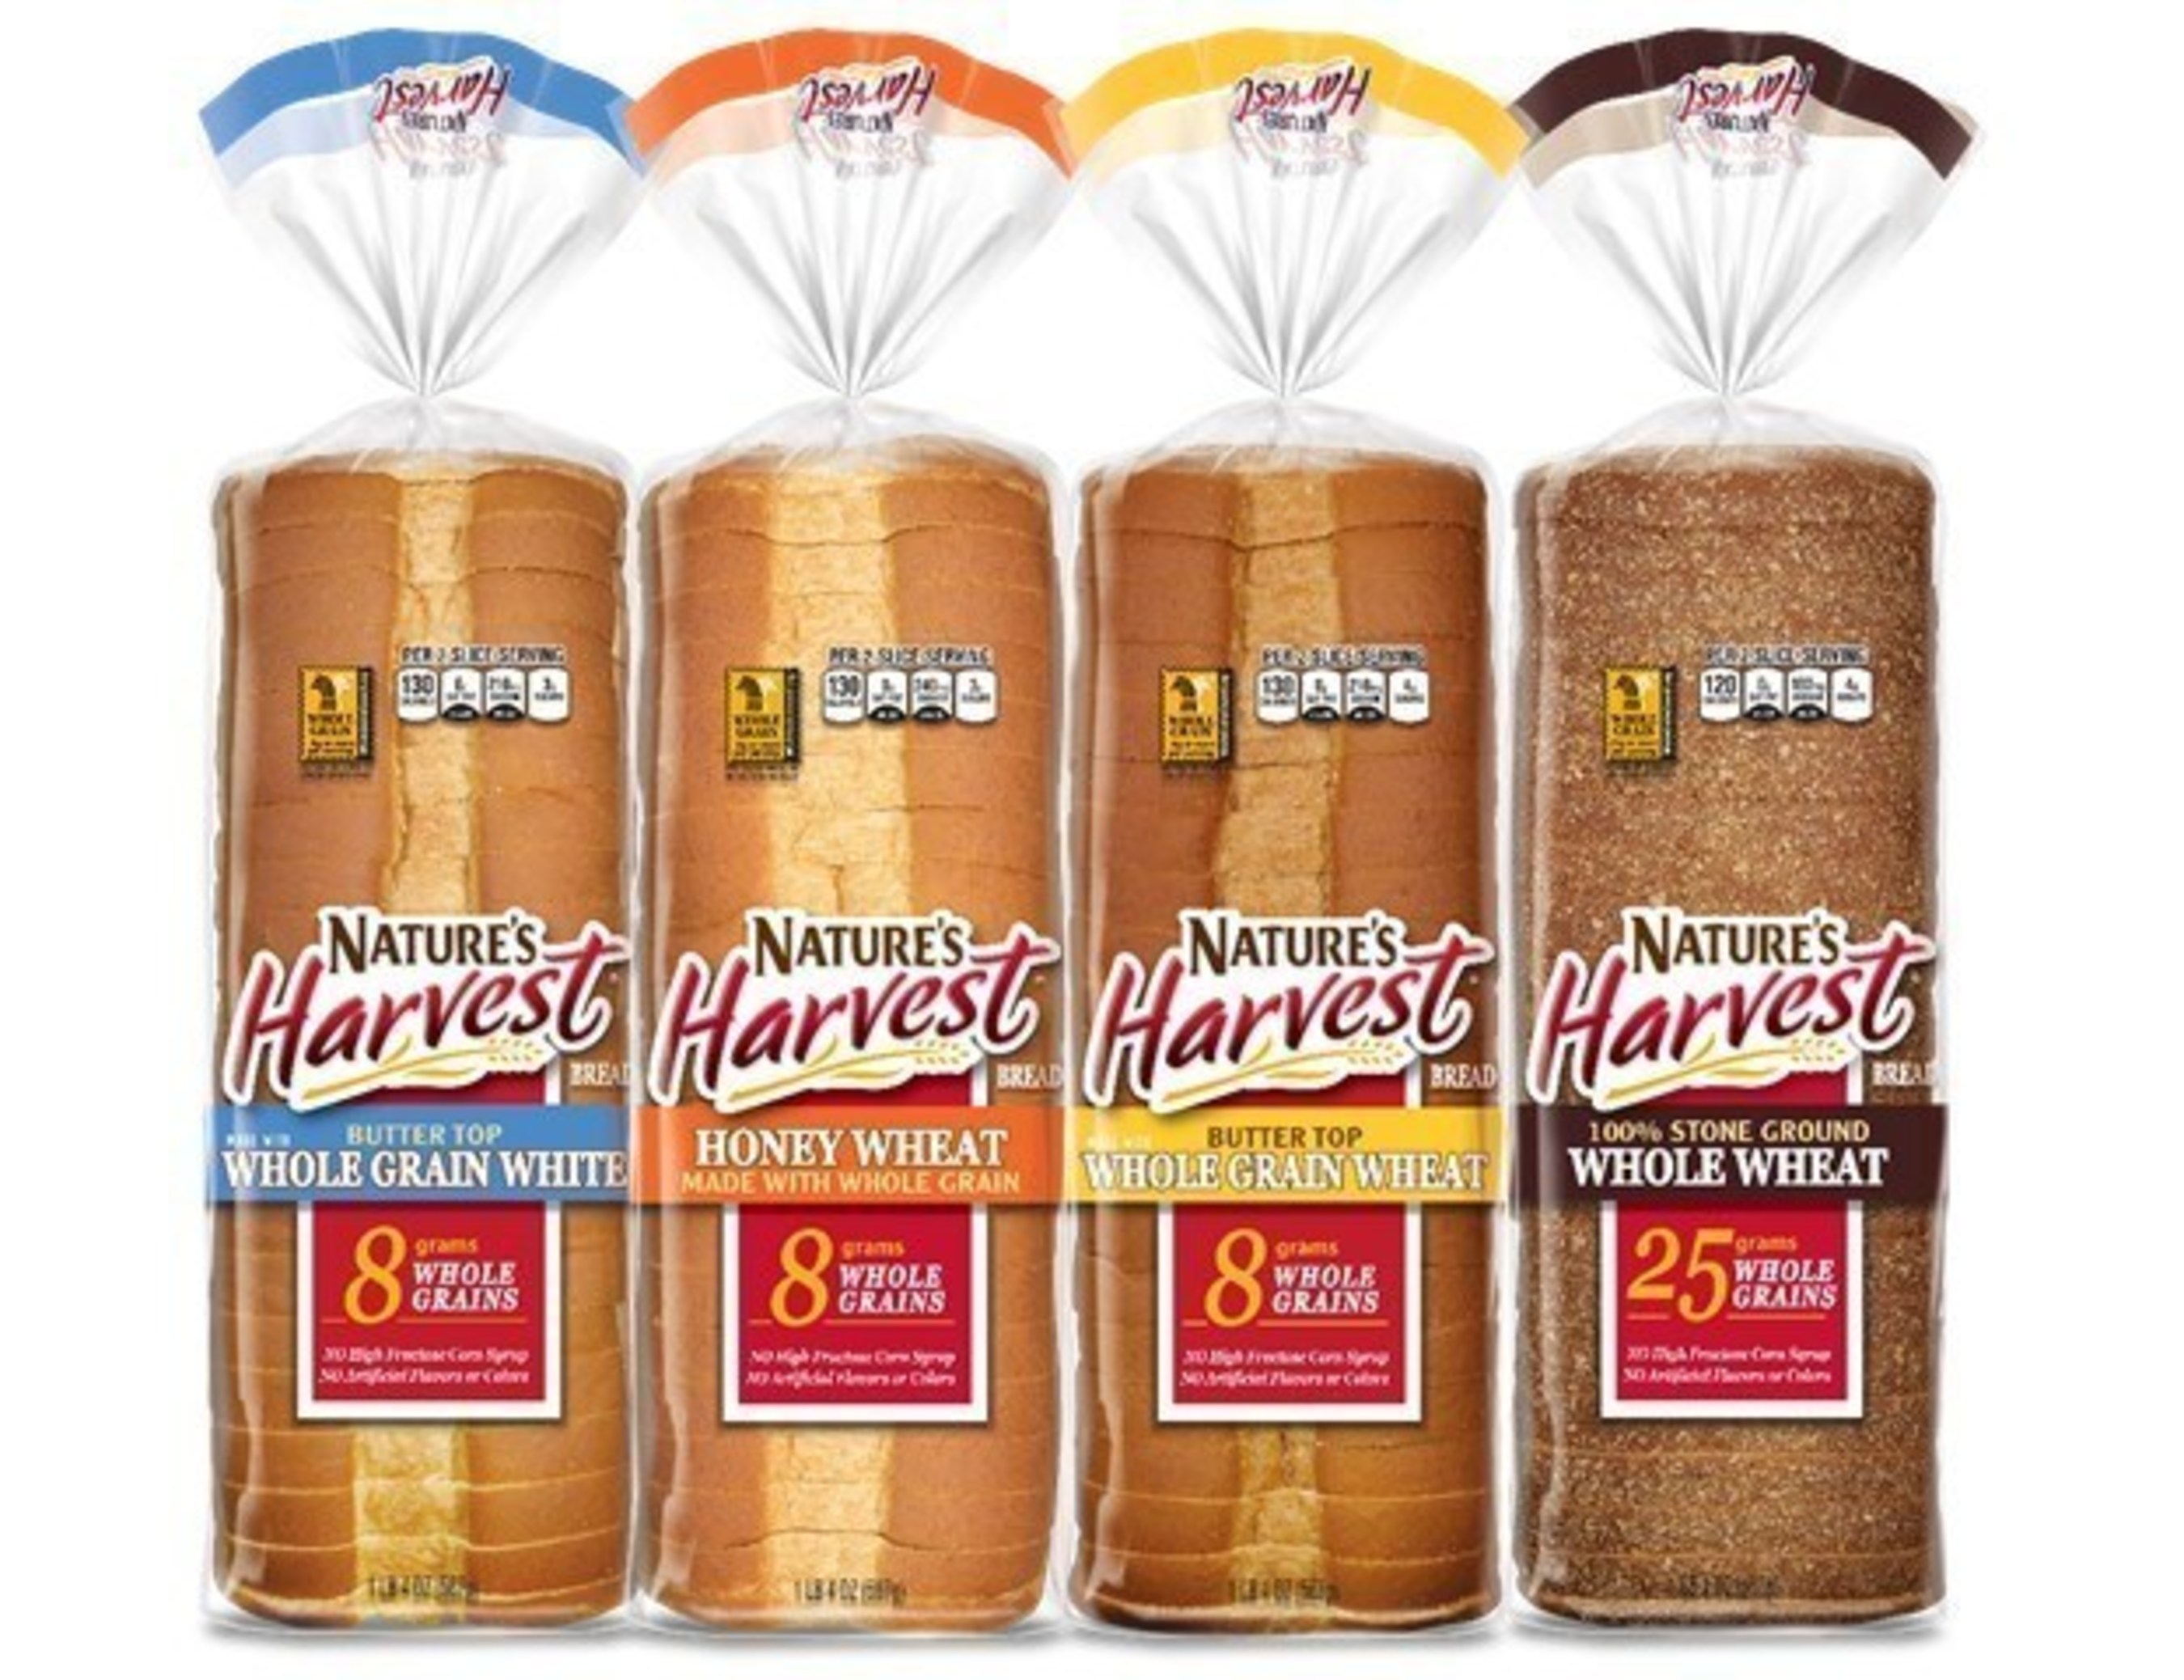 Nature's Harvest Bread Varieties: 100% Stoneground Whole Wheat, Honey Wheat Made with Whole Grain Bread, Butter Top Made With Whole Grain White Bread, Butter Top Made with Whole Grain Wheat Bread